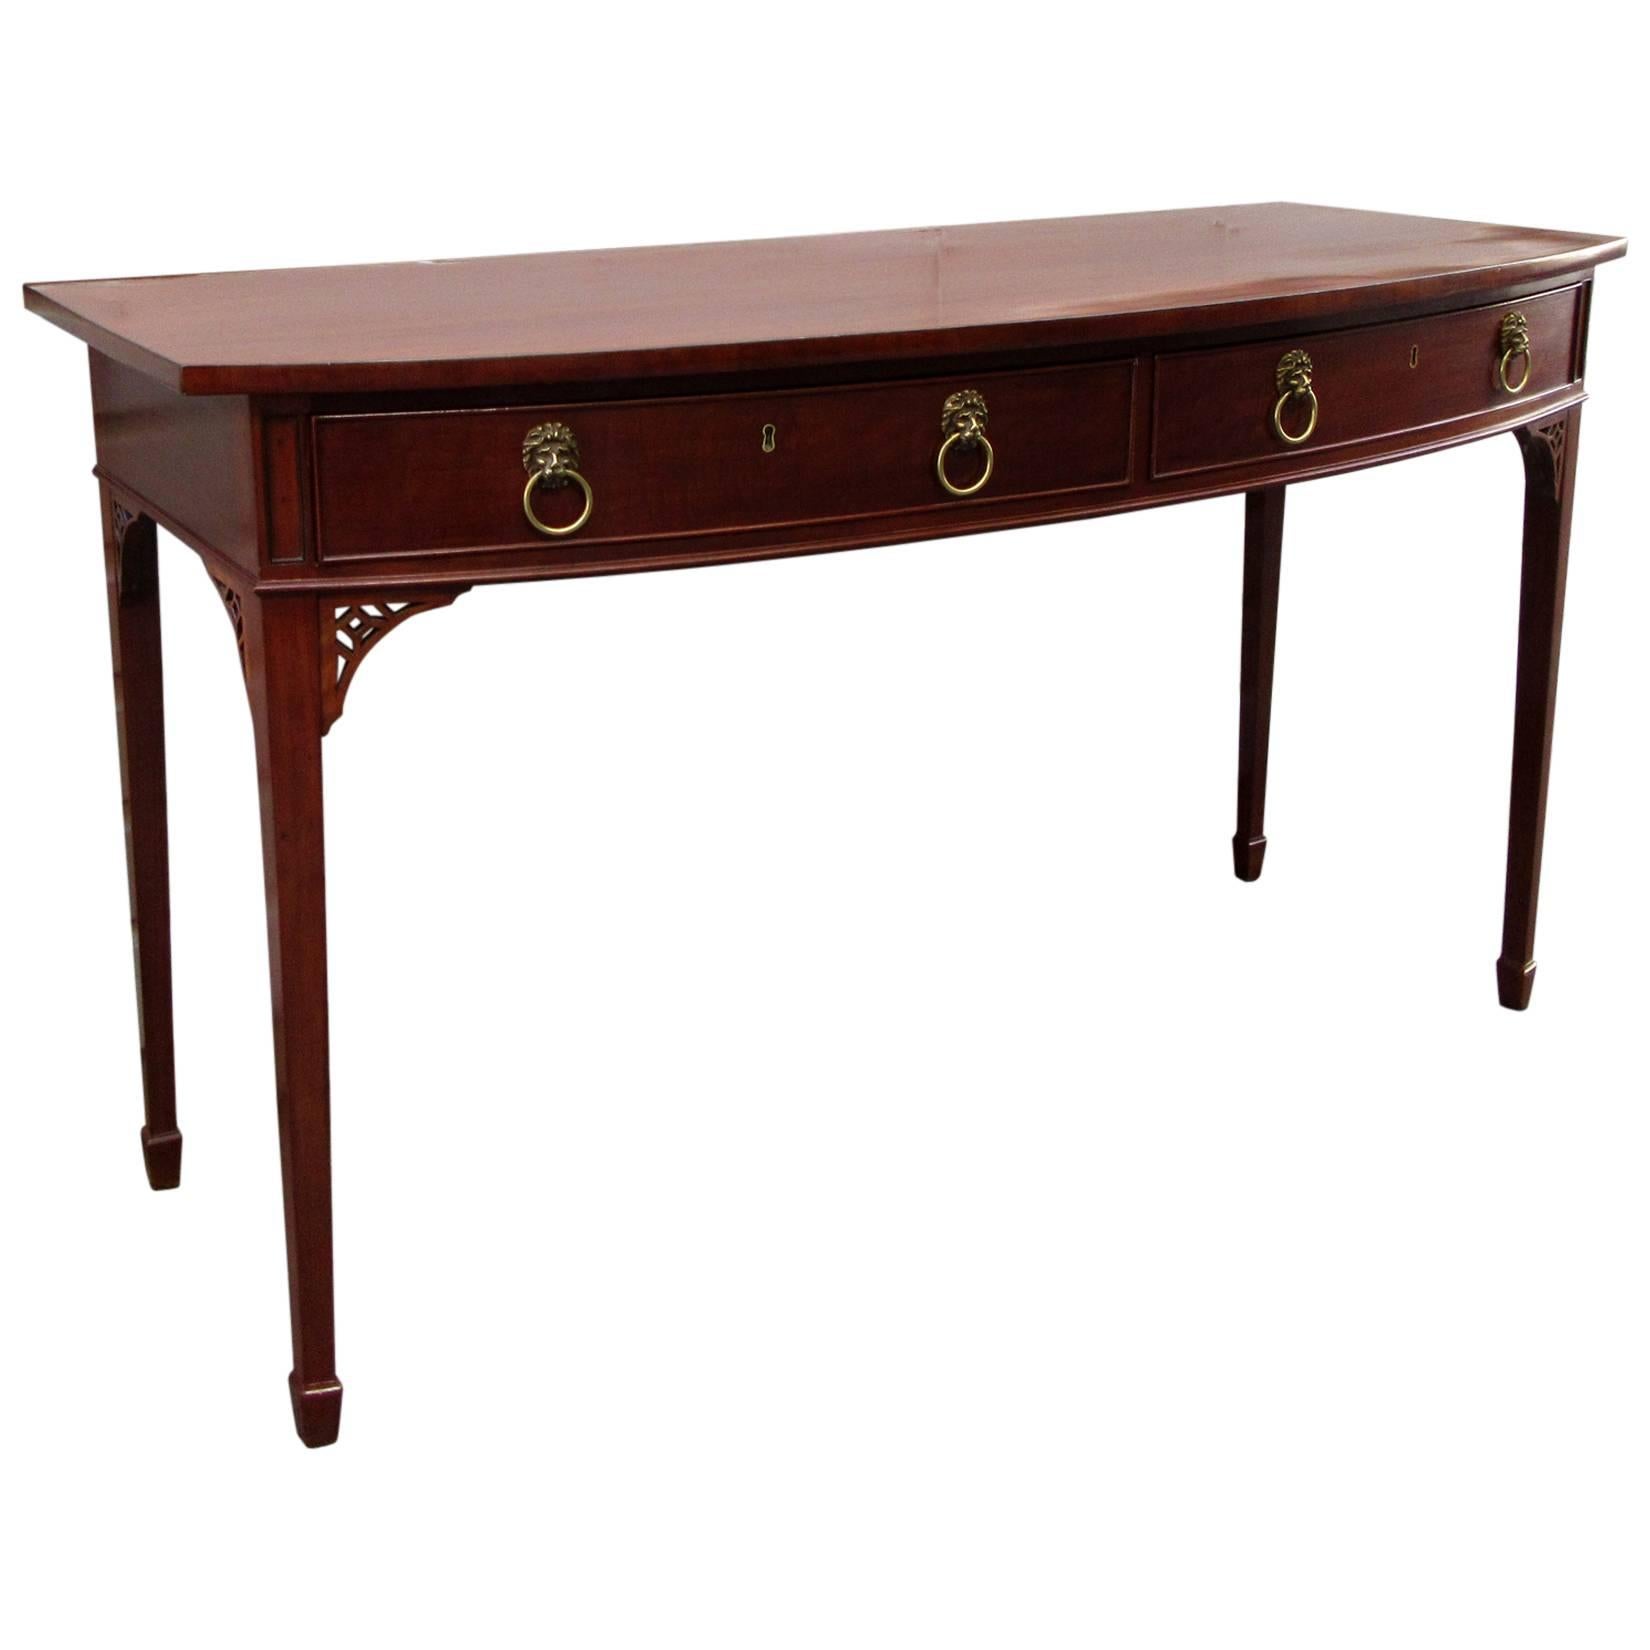 Early 19th Century English Georgian Mahogany Two-Drawer Serving Table with Stamp